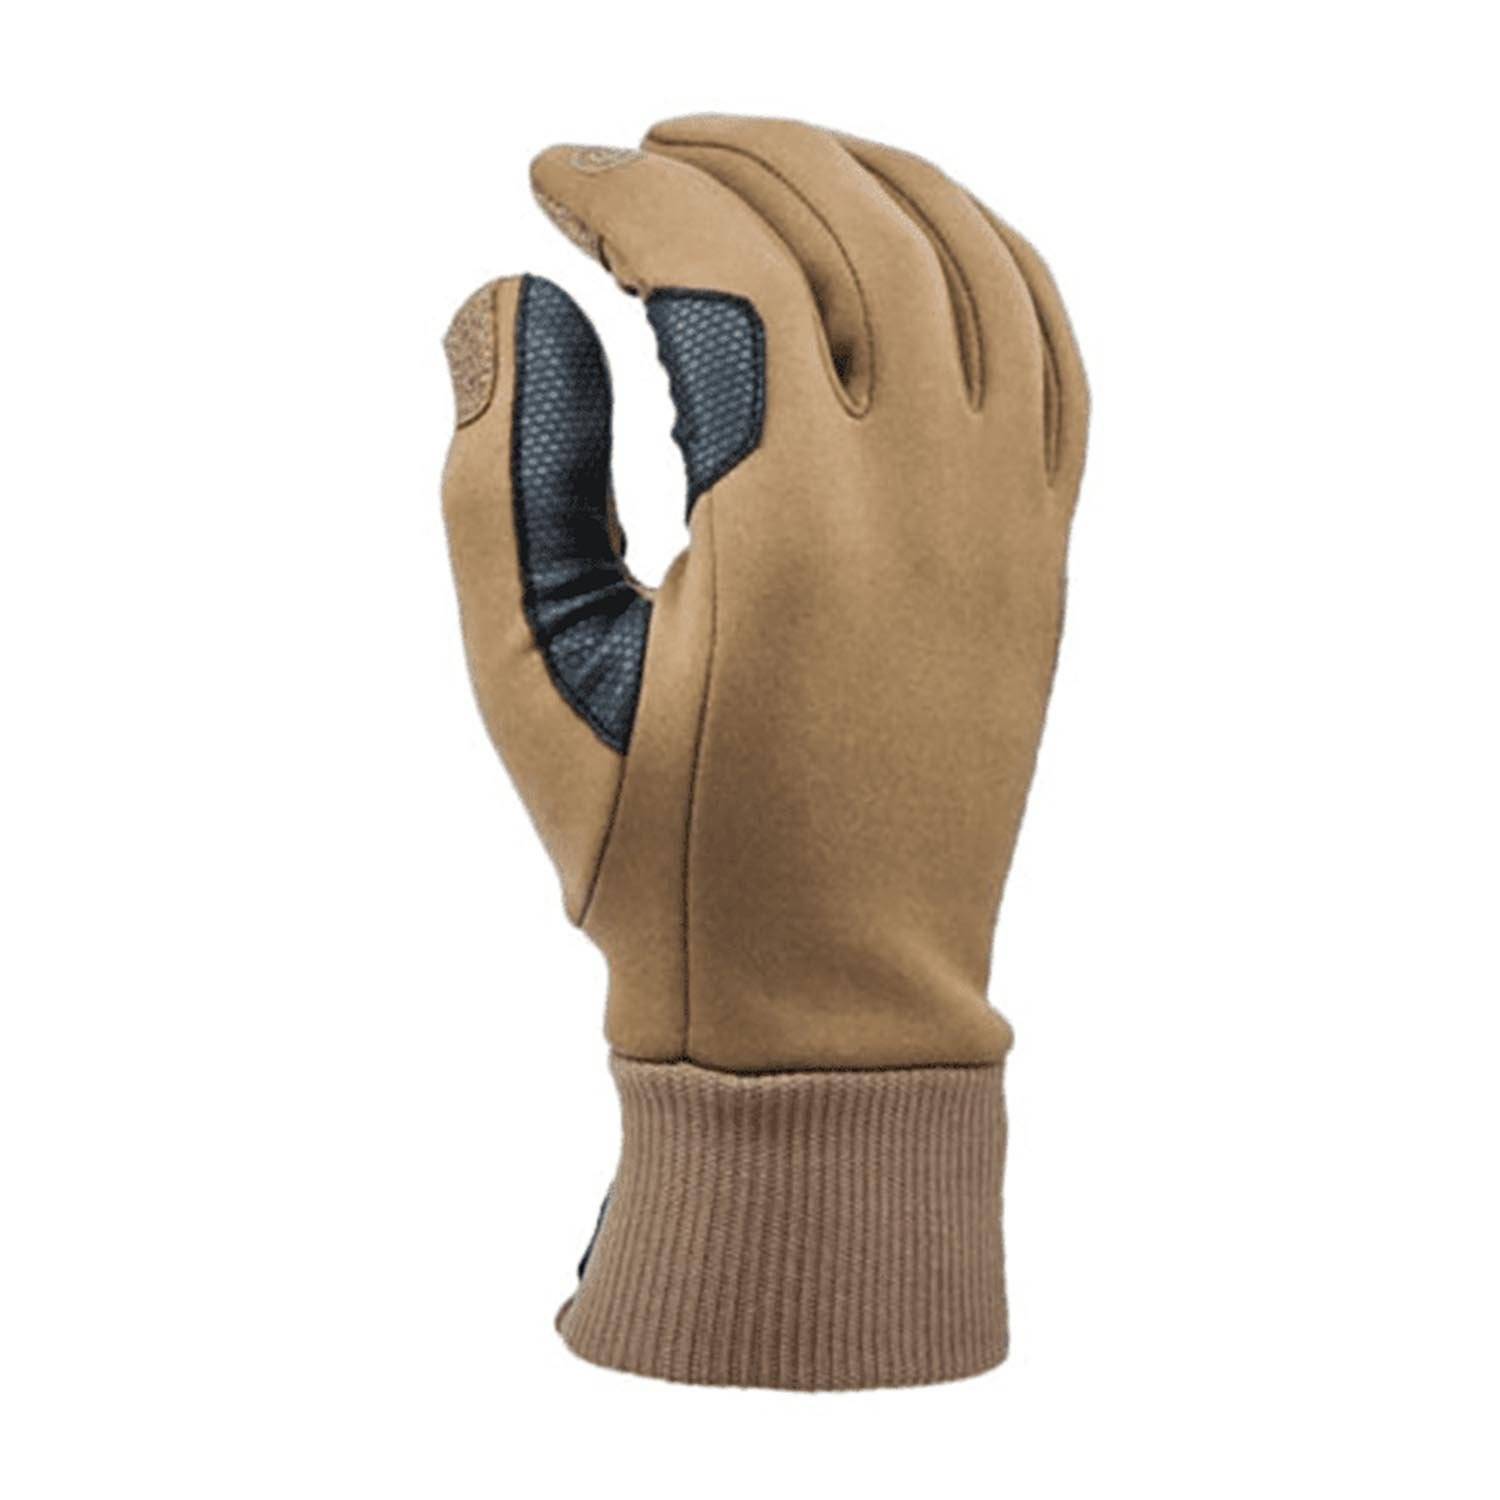 HWI Winter Touchscreen Gloves, Coyote